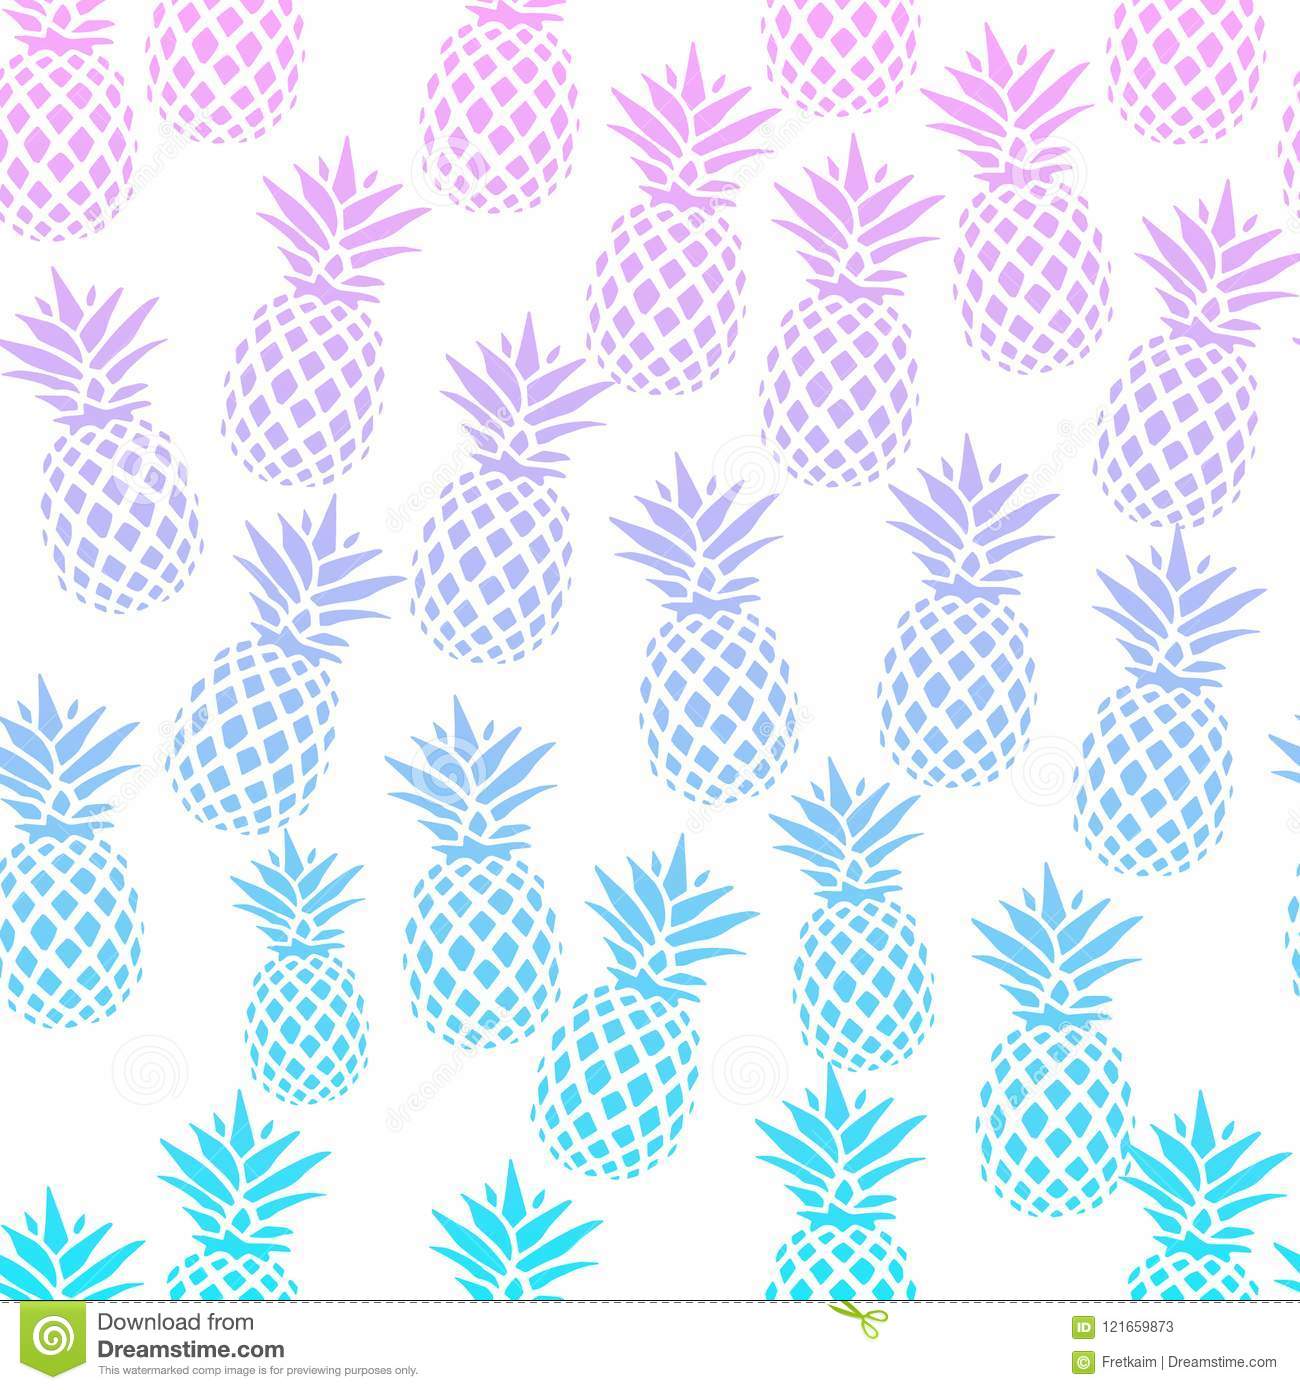 Seamless pattern with pineapples on a white background vector illustration exotic summer print colorful gradient fruit pattern stock vector